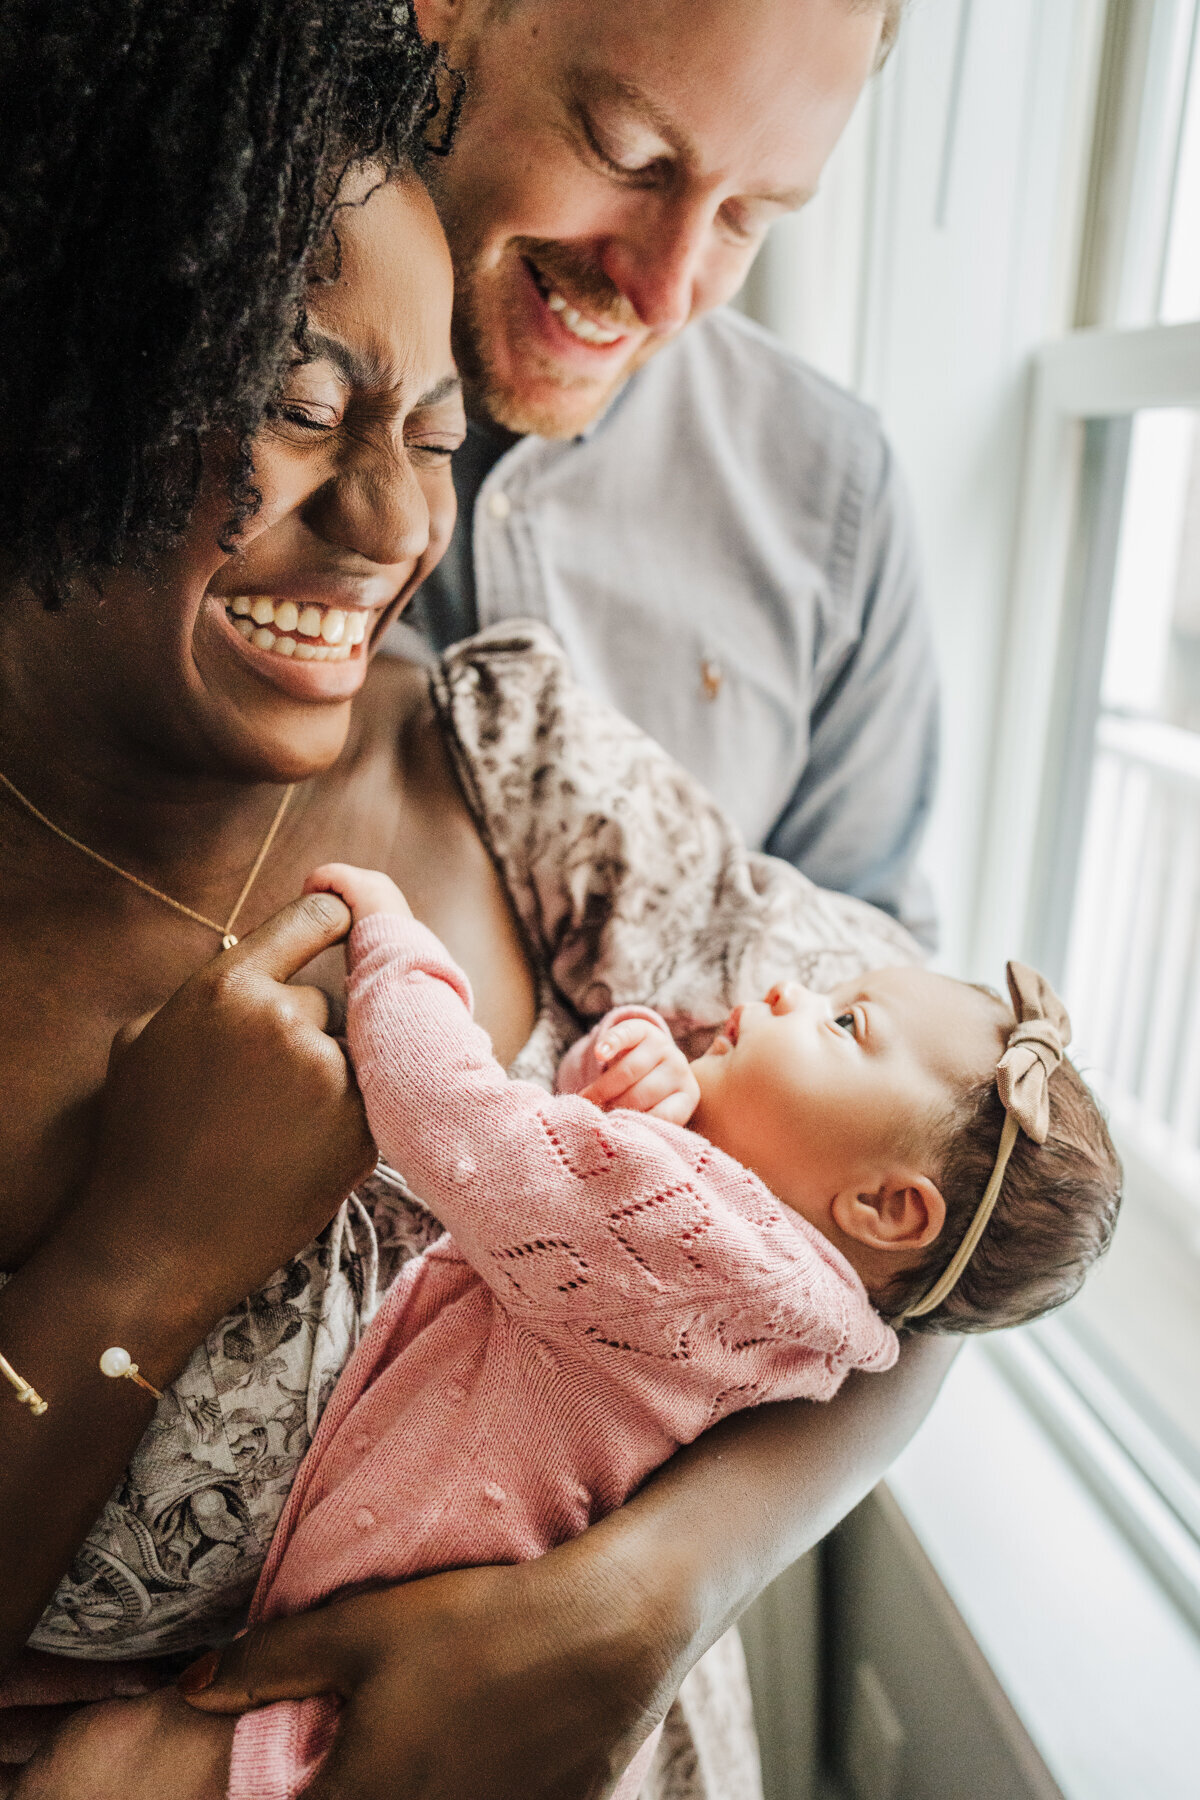 mom and dad stand by window and laugh together while holding infant girl